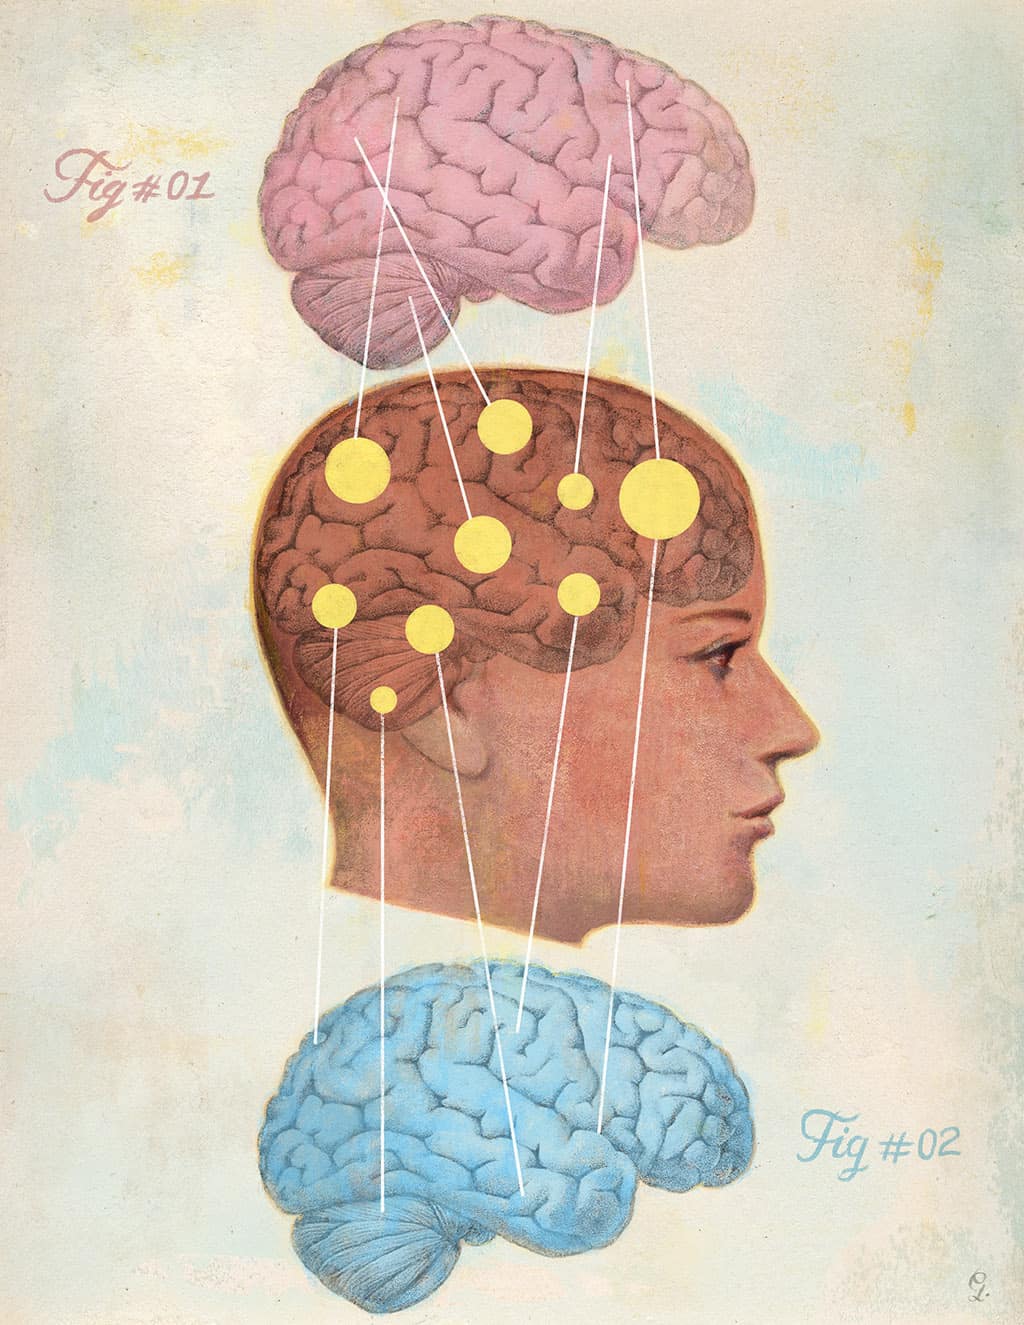 4 Brain Differences Between Boys & Girls: Why They Act/ Think Differently. An illustration of the areas of the brains that are dominant in girls and those in boys.